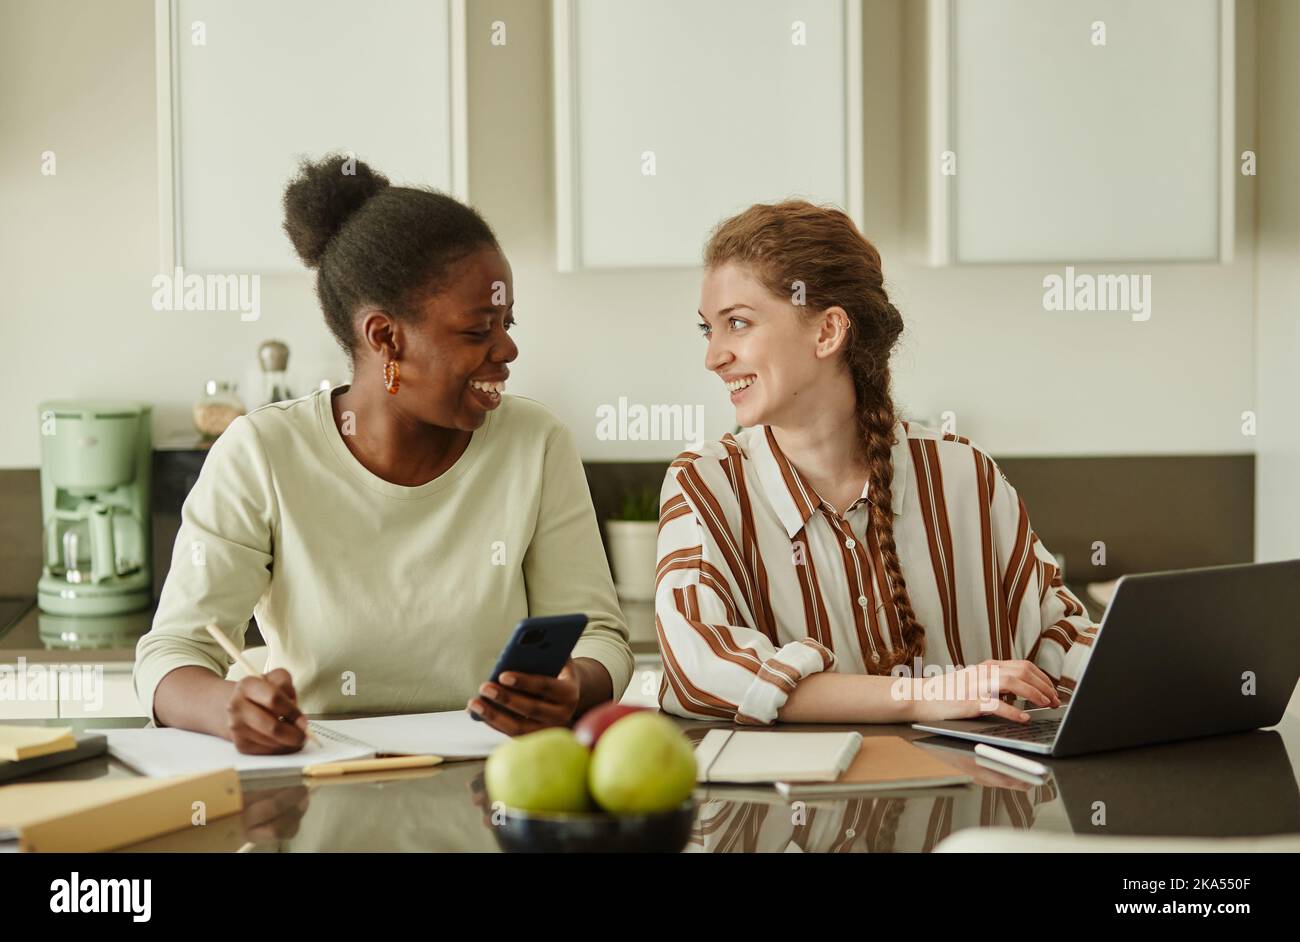 Portrait of two young women looking at each other and smiling while working on small business ideas together at home Stock Photo